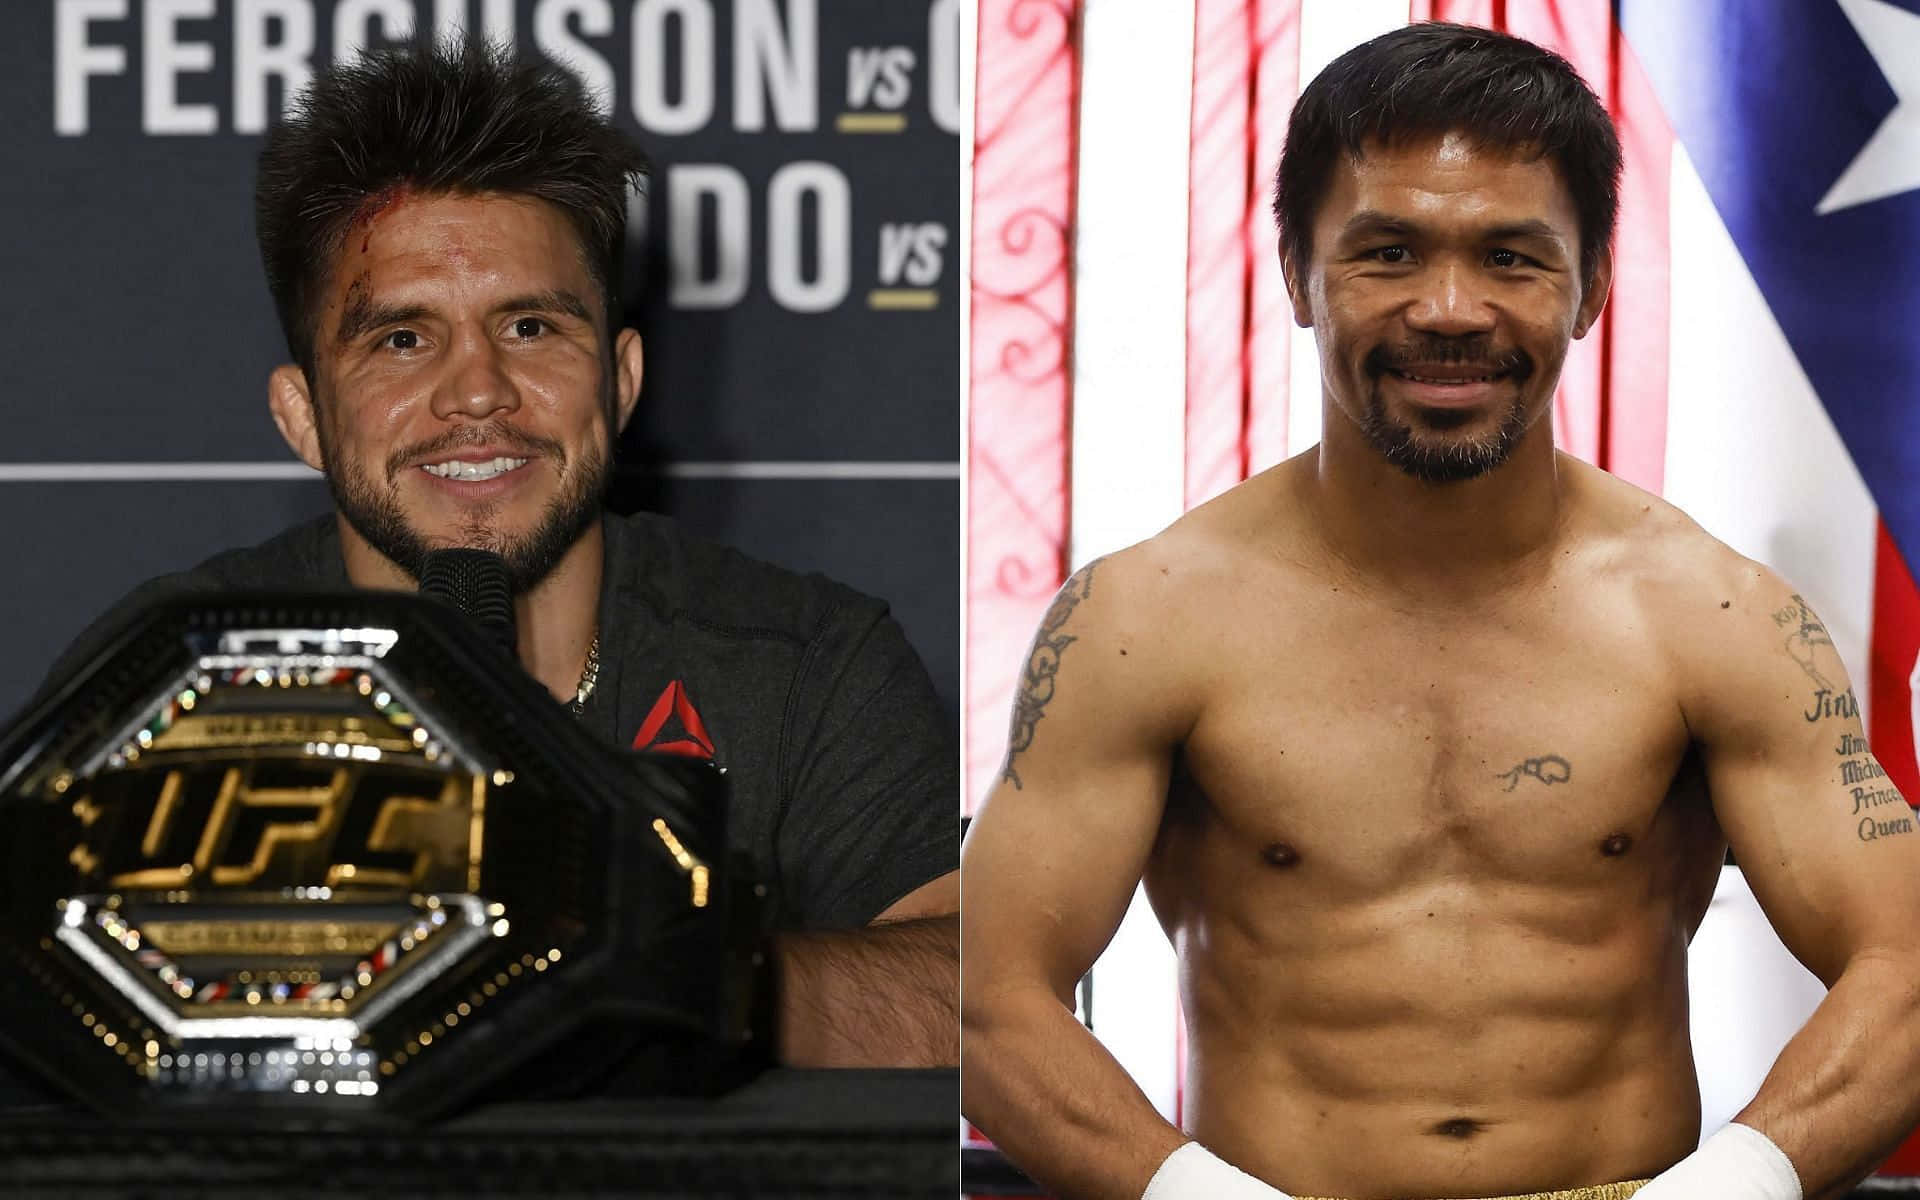 Henry Cejudo And Manny Pacquiao Collage Wallpaper